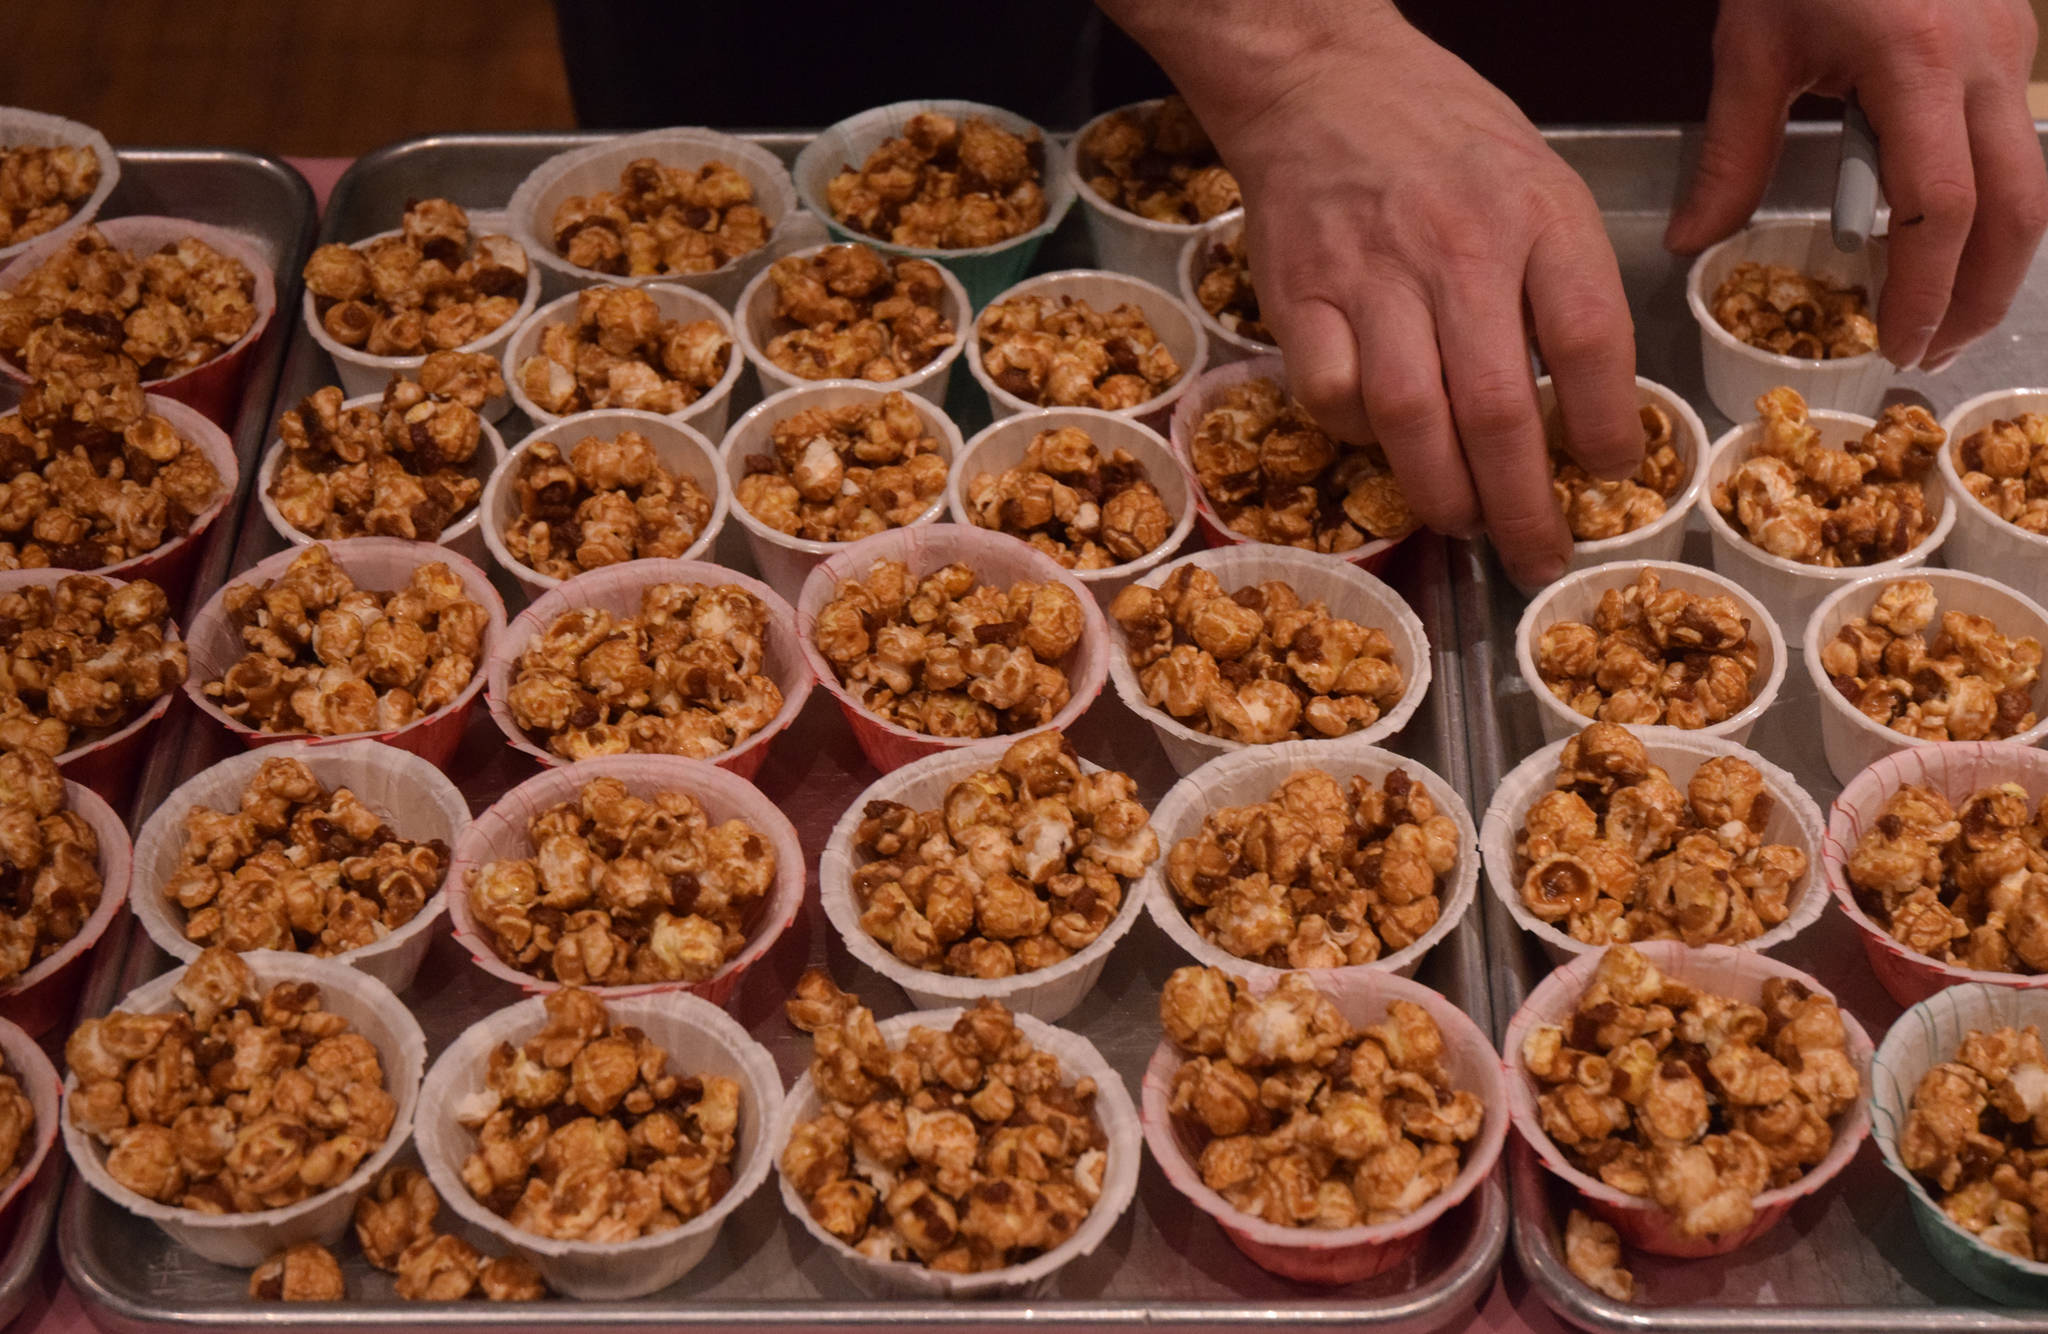 Phil Wheeler of Alaskan Fudge Co. arranges cups of bacon-flavored popcorn in February 2015 during the third annual Juneau Baconfest. (Michael Penn | Juneau Empire File)